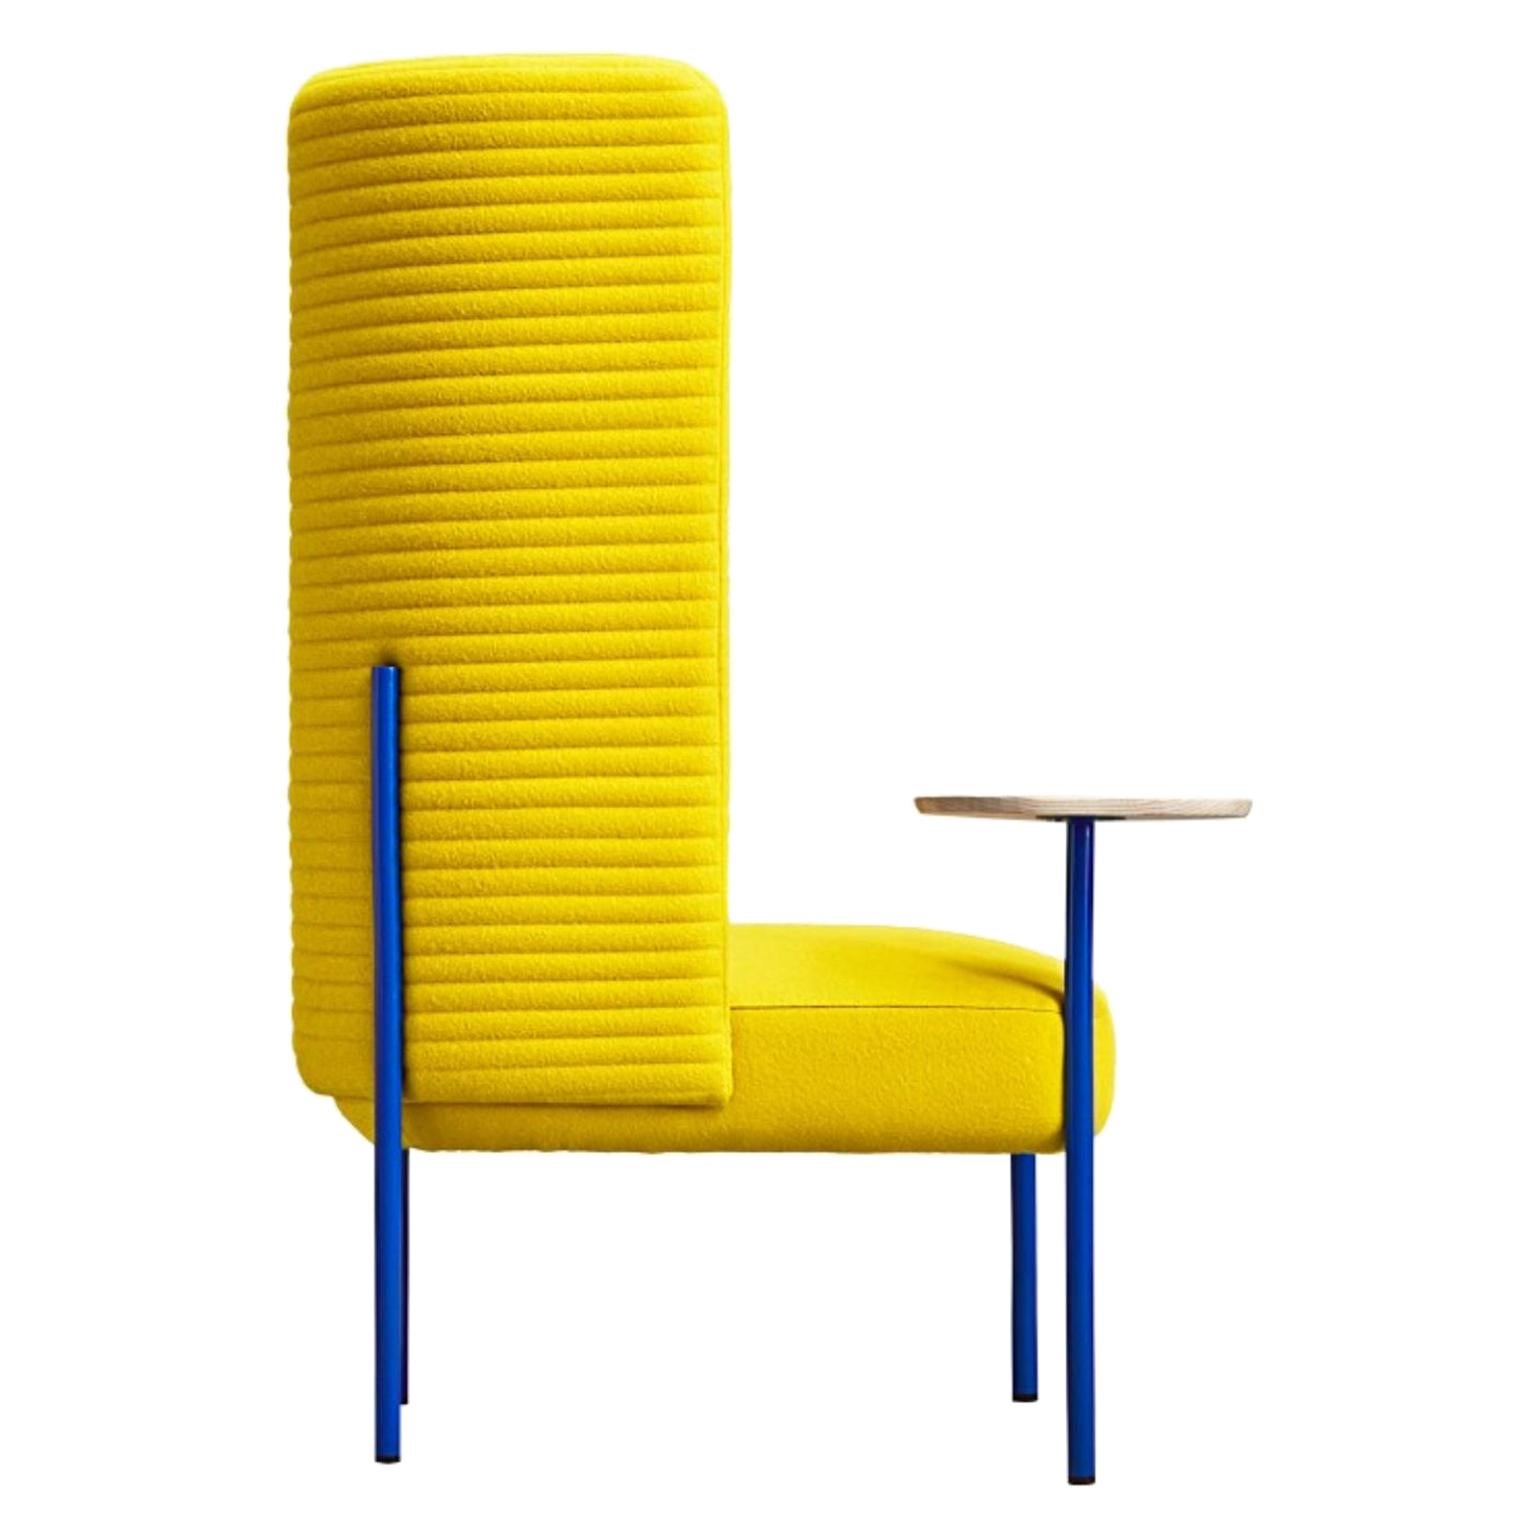 Ara Armchair with Side Table by PerezOchando